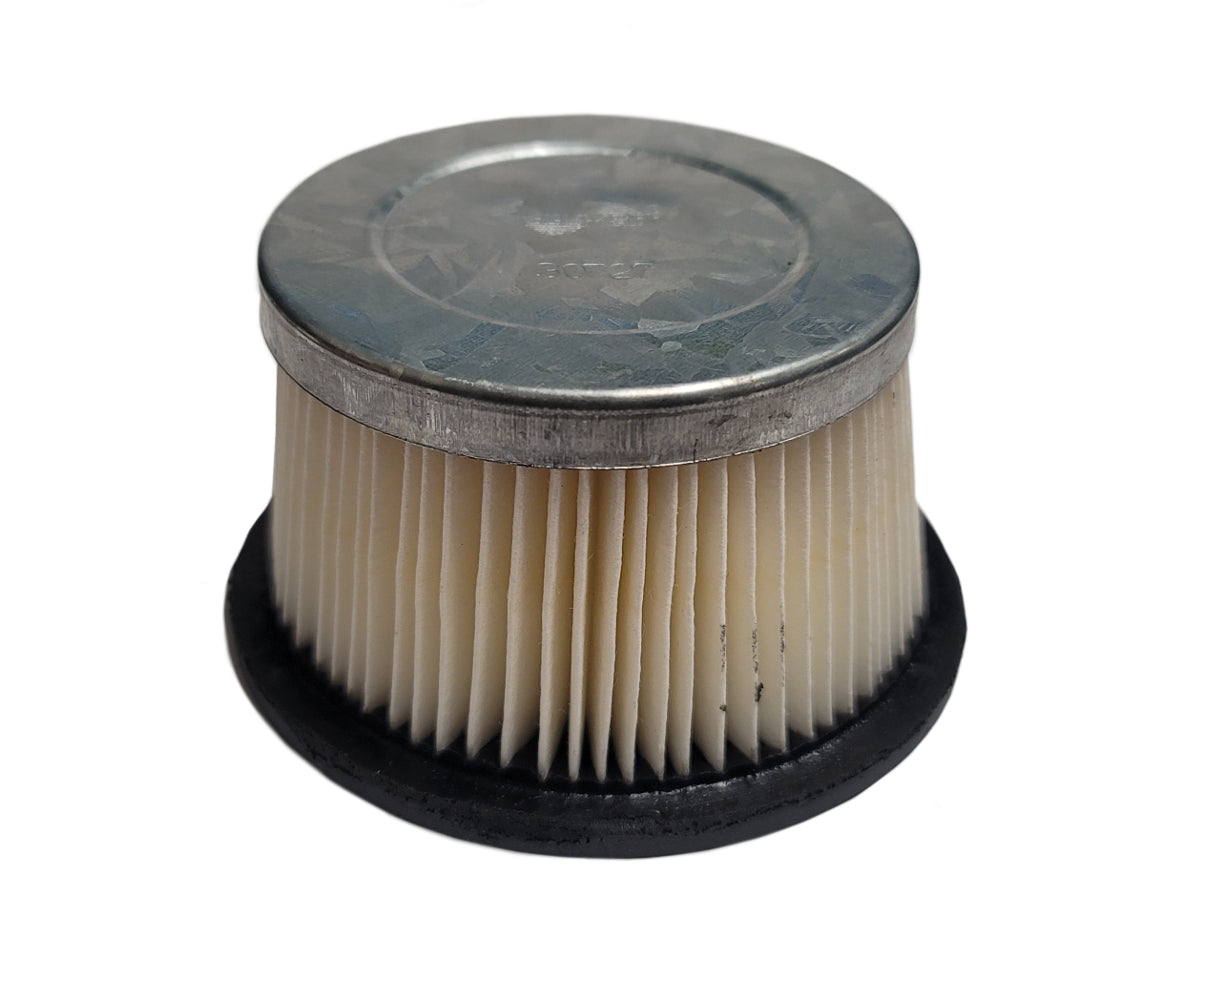 Western Auto Outdoor Air Filter WA-070 Fits 3 â€“ 8 HP vertical & horizontal engines LAV, H, HS, HH, VH, HM, V40-70, HS30 series 3-5/8â€ OD x 2-1/4â€ ID x 2â€ H Replaces: Cub Cadet 488619R1 Cub Cadet TC30727 John Deere AM30900